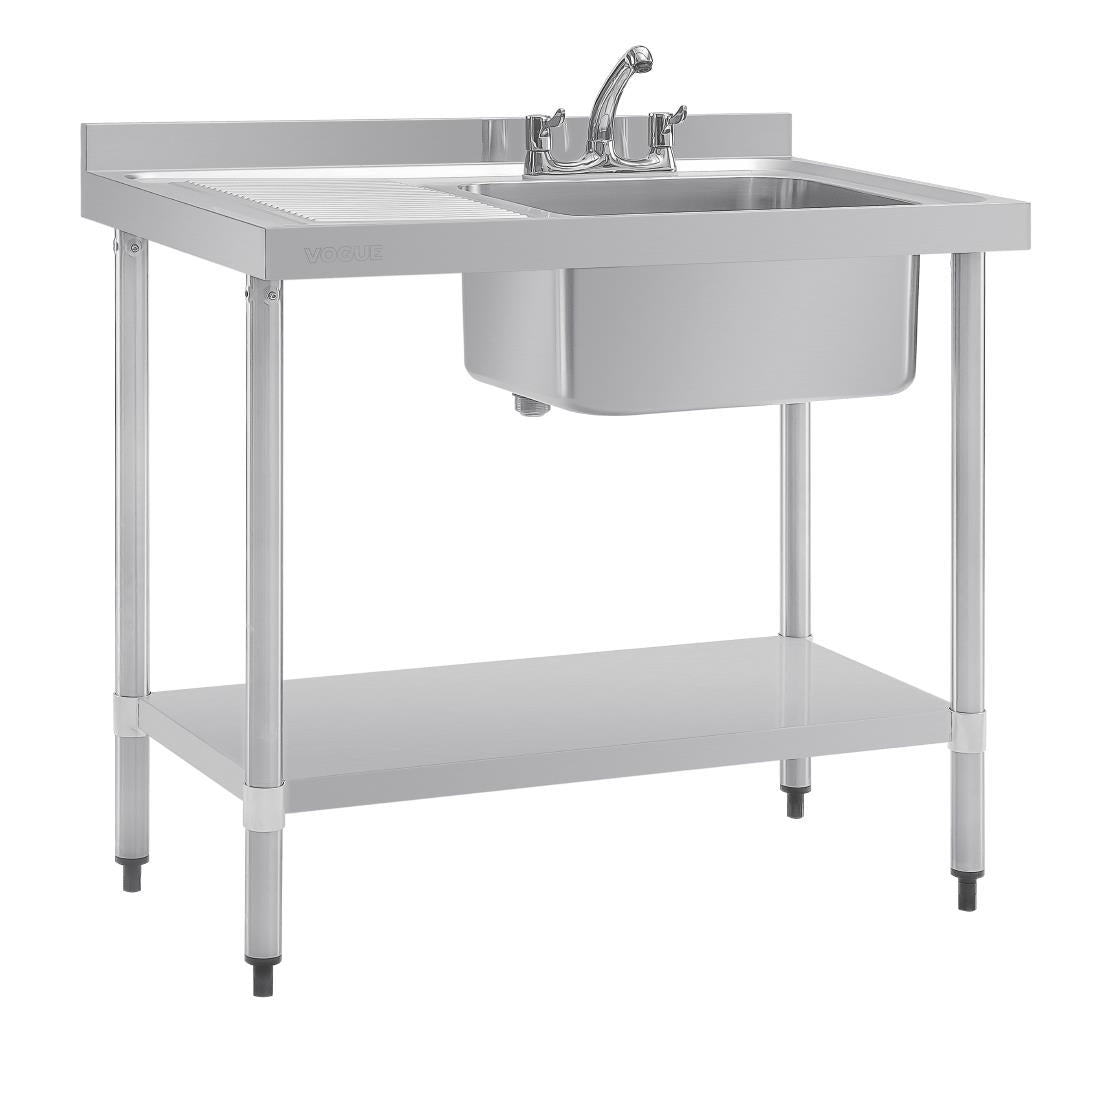 DY821 Vogue Single Sink Left Hand Drainer 1000mm JD Catering Equipment Solutions Ltd